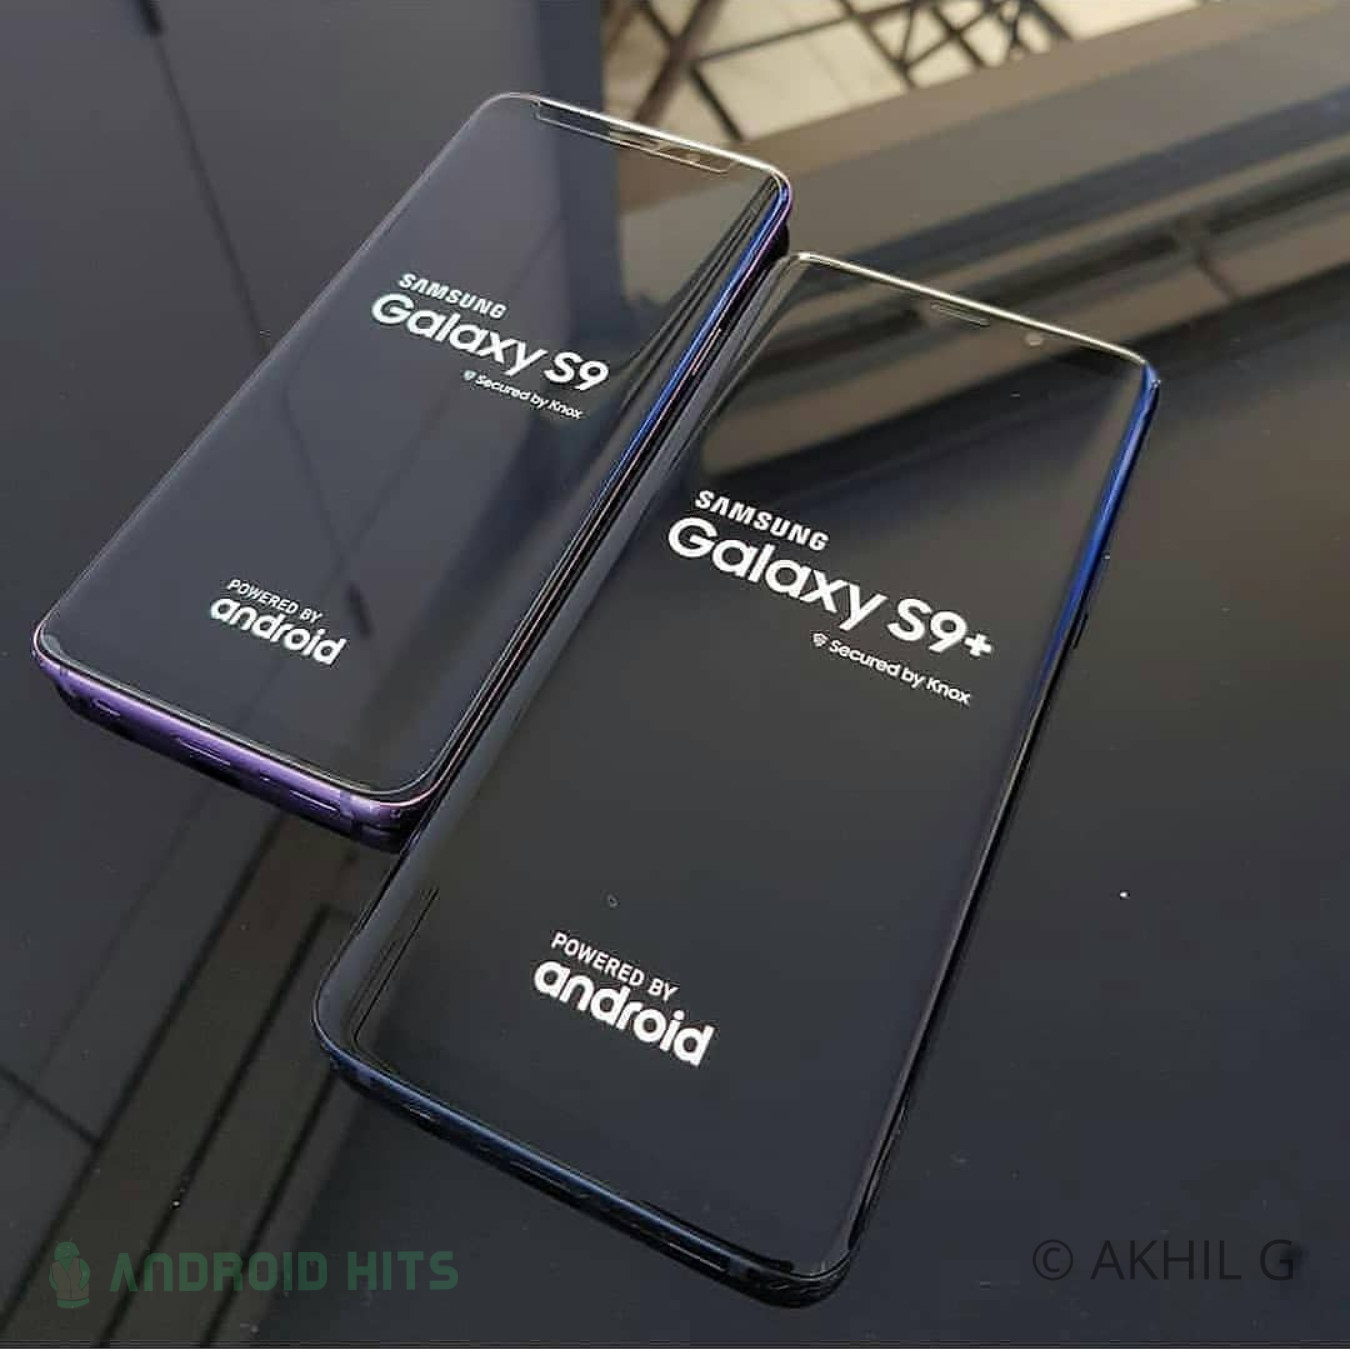 Microsoft Store sells non-Microsoft Edition Galaxy S9 devices with free wireless charger 2